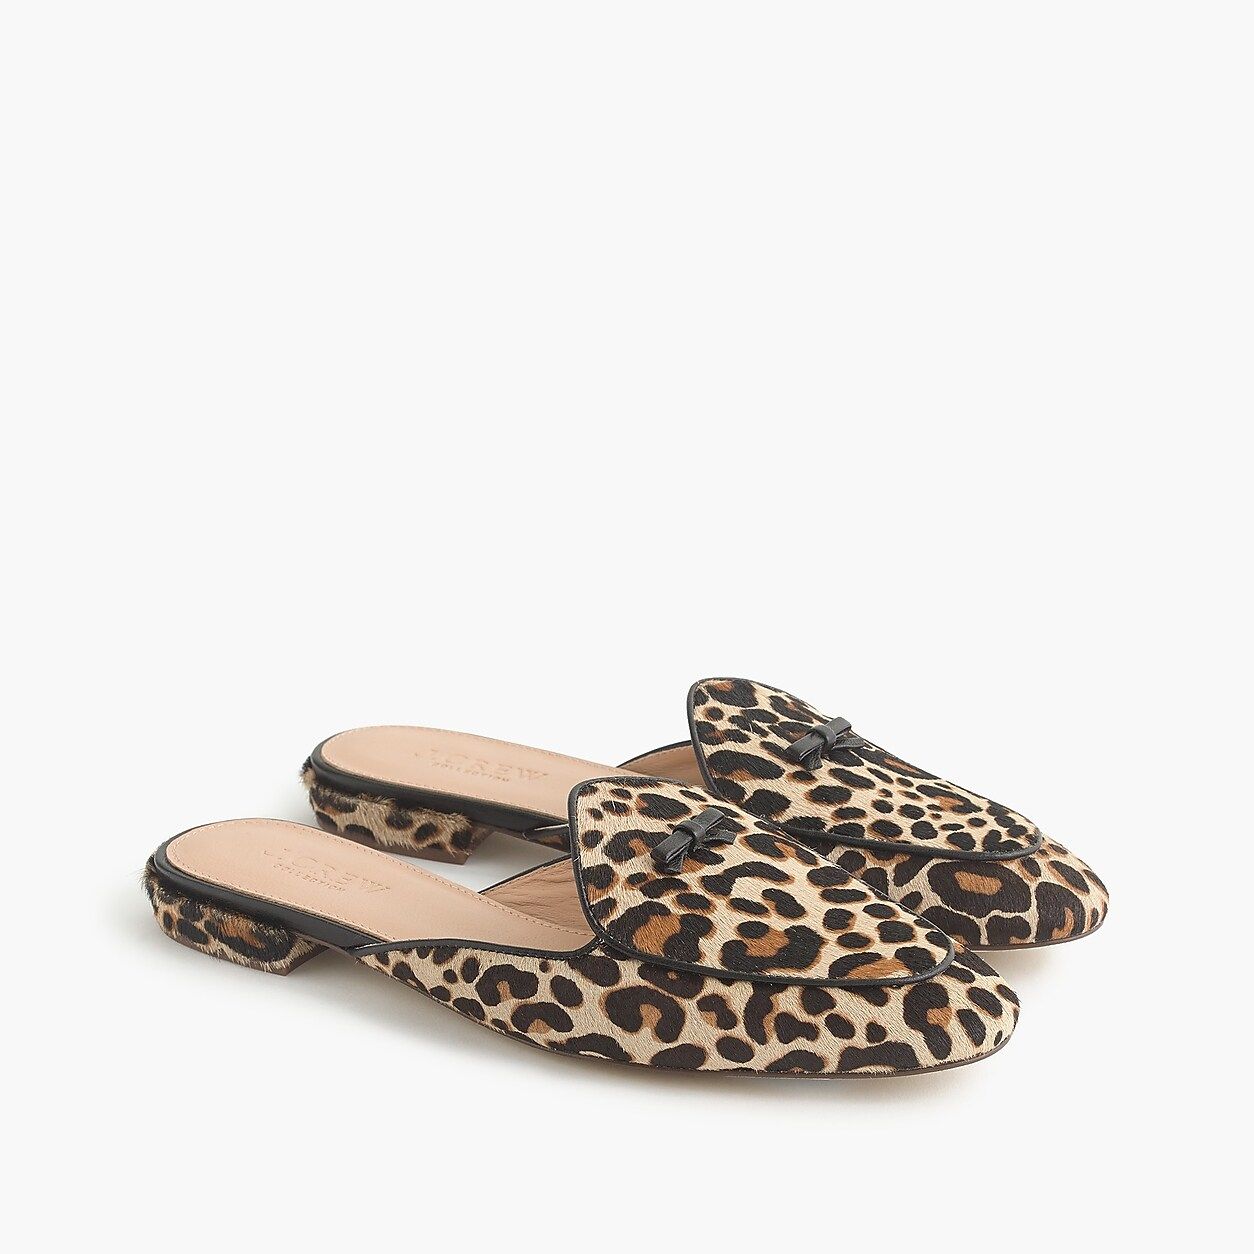 Piped loafer mules in calf hair | J.Crew US